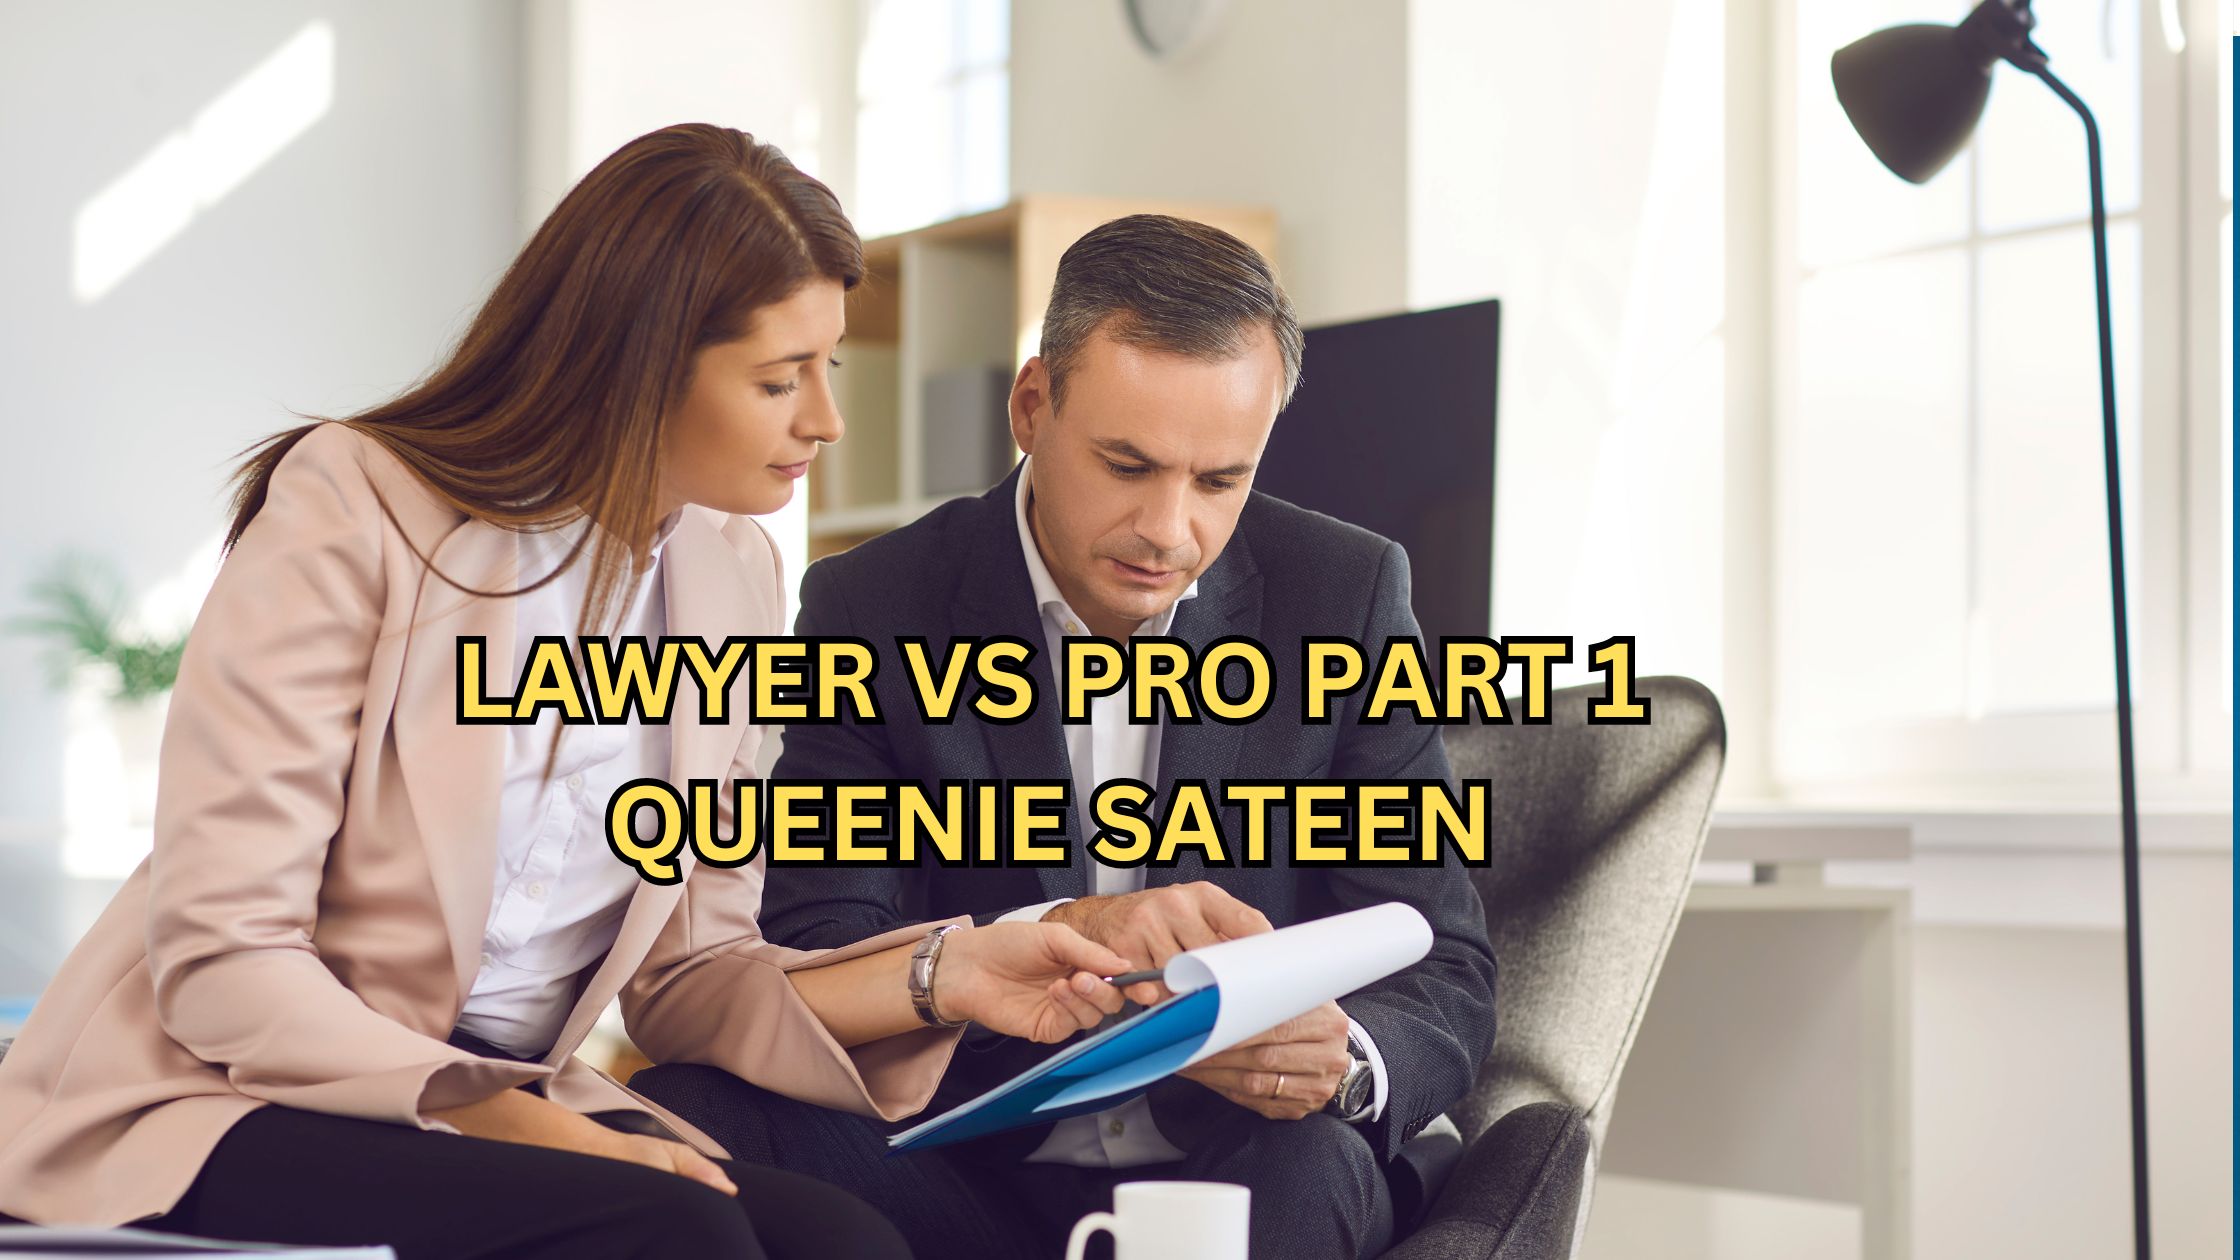 You are currently viewing Lawyer vs Pro Part 1 Queenie Sateen 7 Important Points